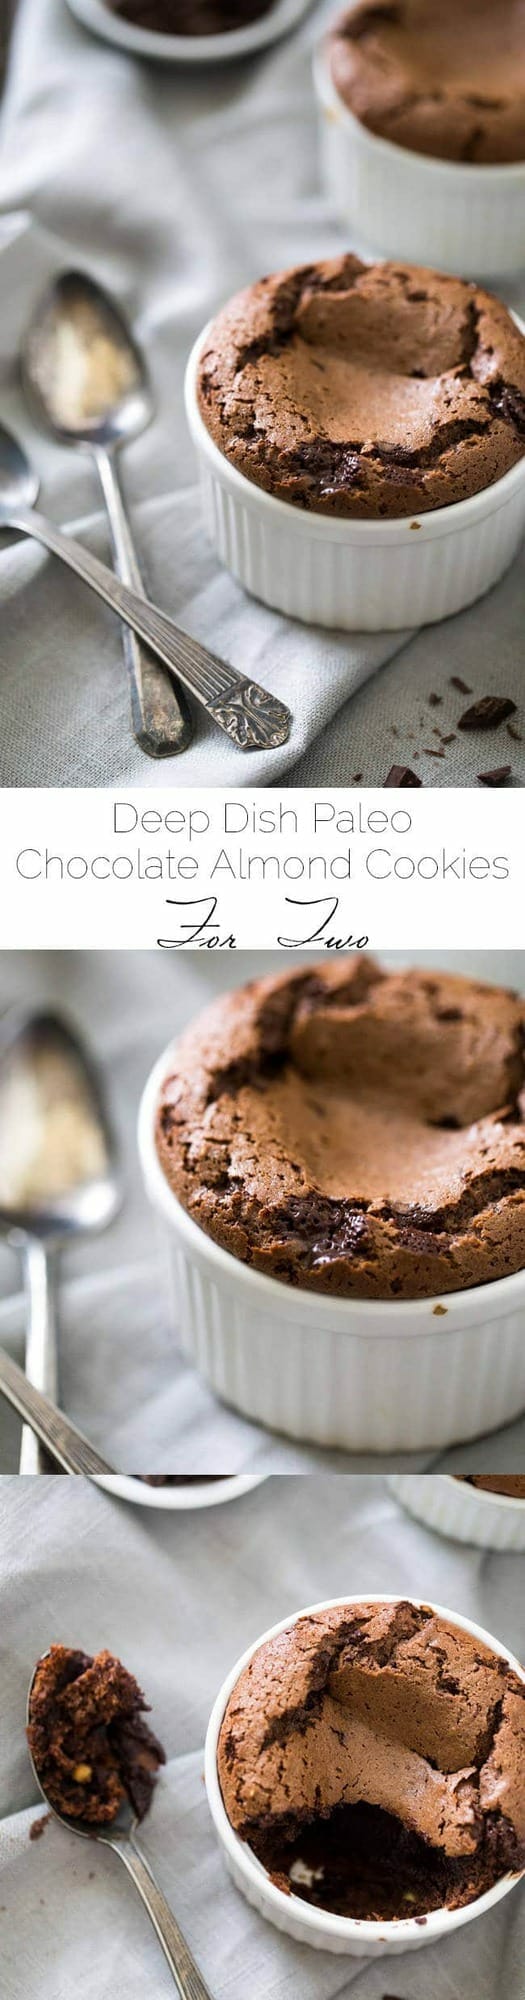 Deep Dish Paleo Chocolate Chip Cookies for 2 - Ready in under 25 minutes, and SO rich and HEALTHY. You'll LOVE these! | Foodfaithfitness.com | @FoodFaithFit